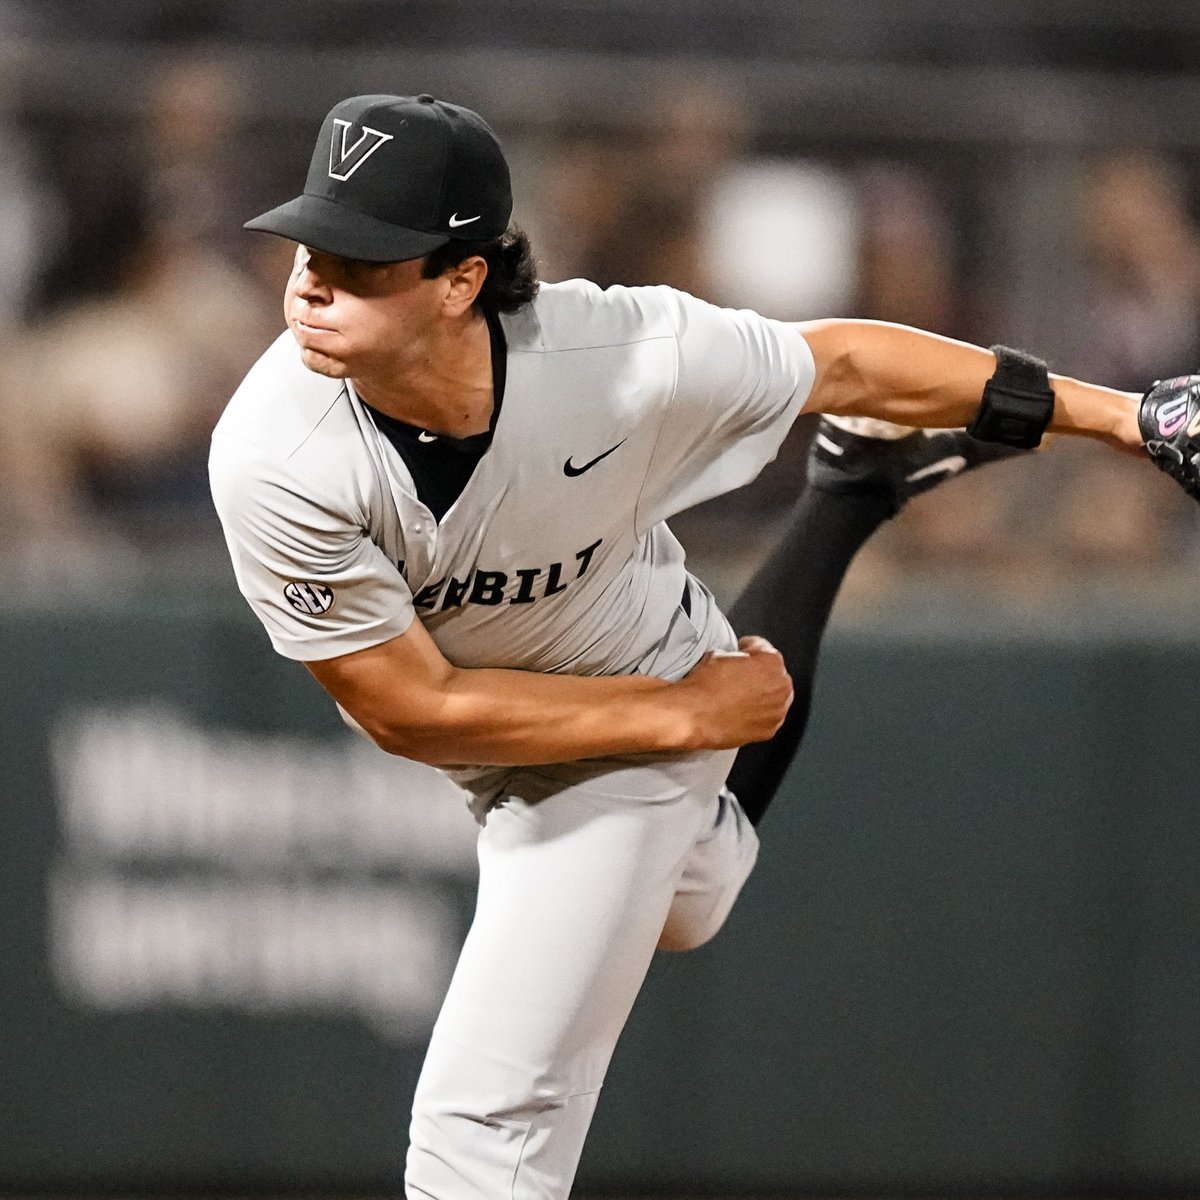 Tim Corbin on freshman RHP Luke Guth: 'I don't want to compare him to Walker Buehler, but there is a size comparison, an arm speed comparison, and a potential for a pretty good breaking ball too. I'm looking forward to his future.' 📸 : @VandyBoys 🎙️ : @949theFan